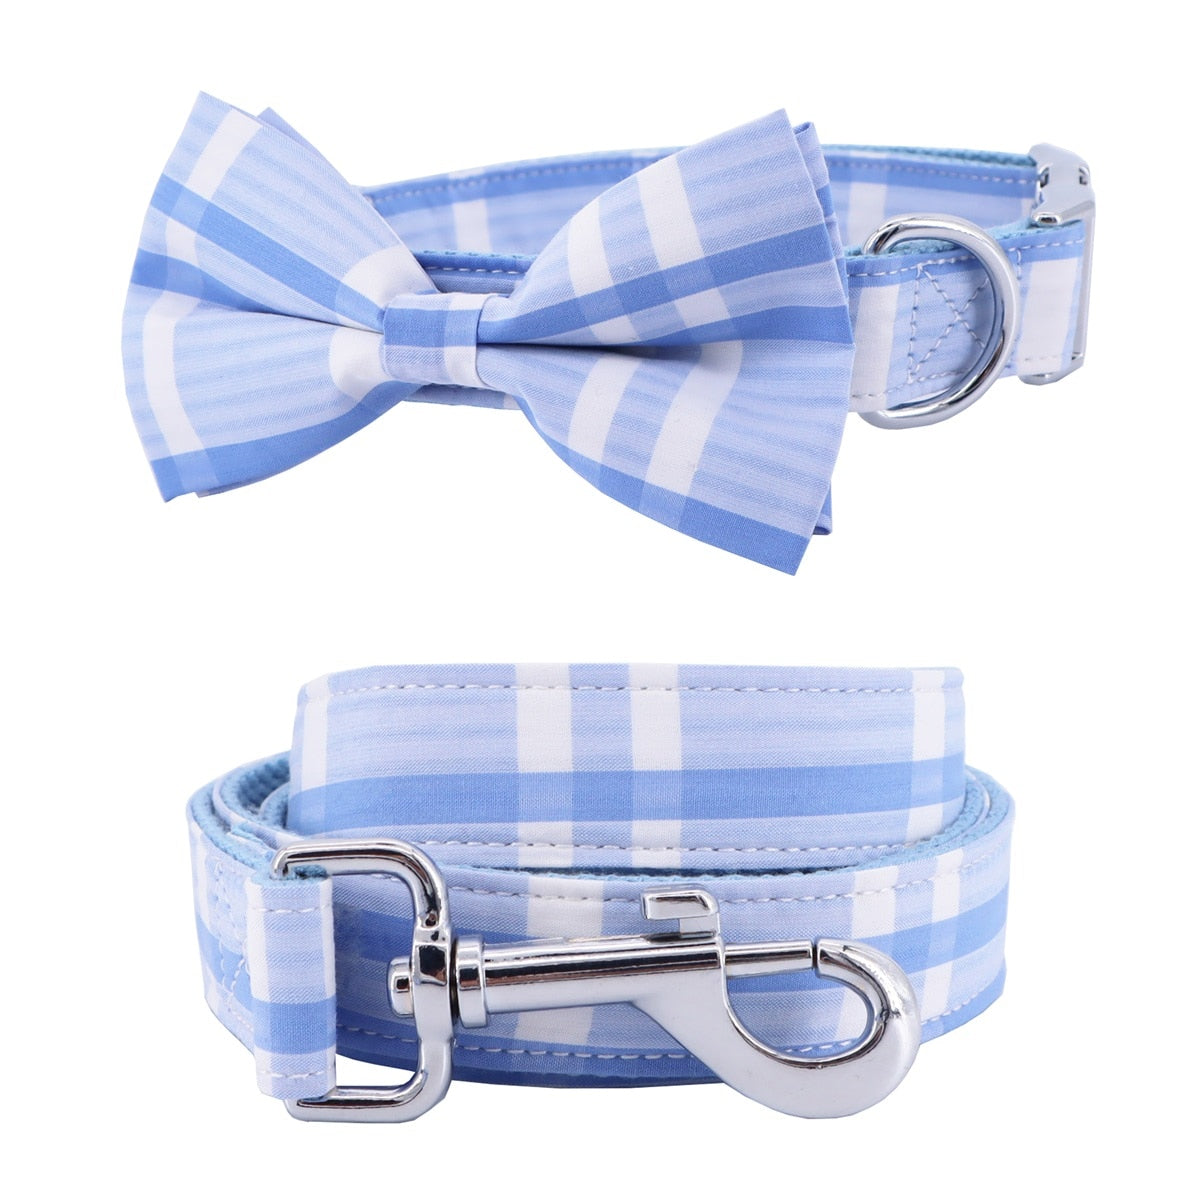 Blues And Skies: Personalized Collars And Leashes - CurliTail